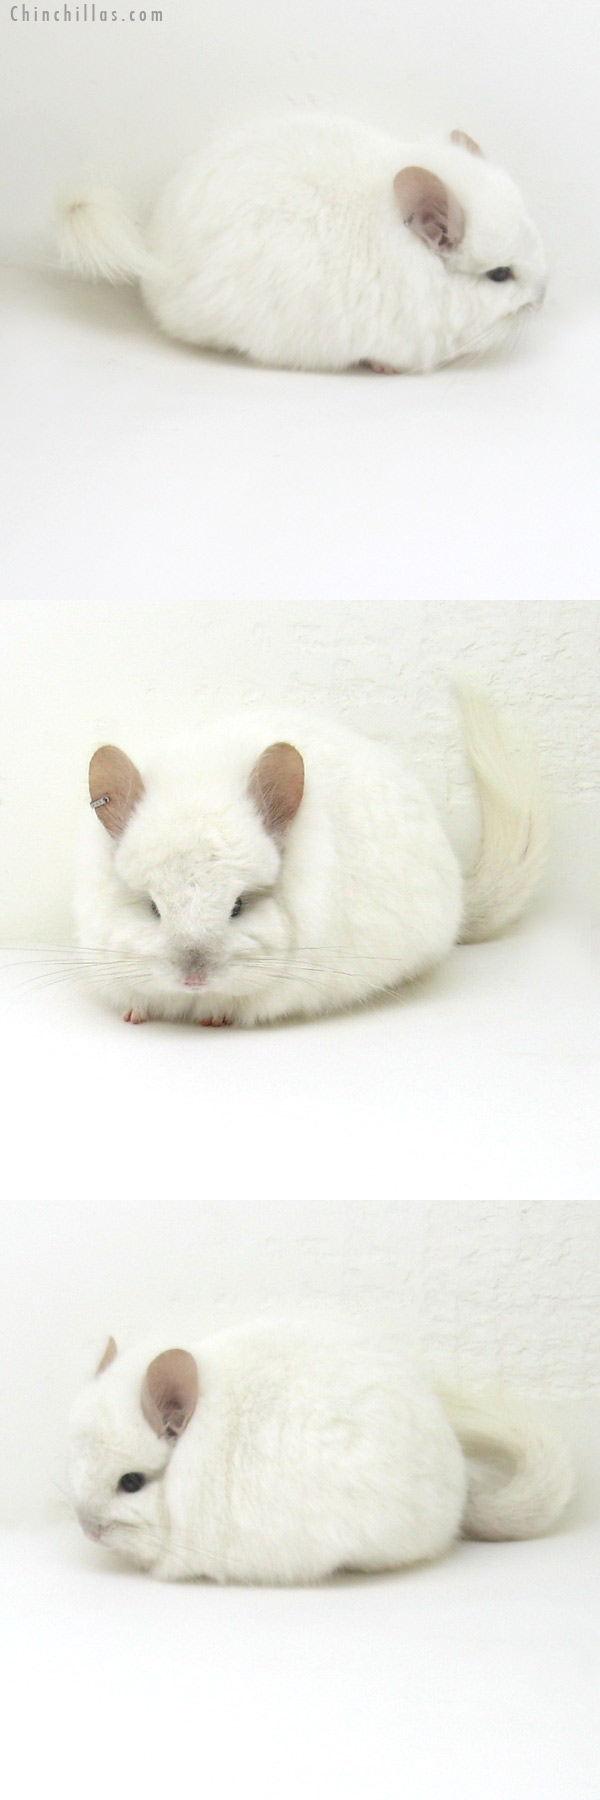 Chinchilla or related item offered for sale or export on Chinchillas.com - 12170 Exceptional Pink White Royal Persian Angora Female Chinchilla